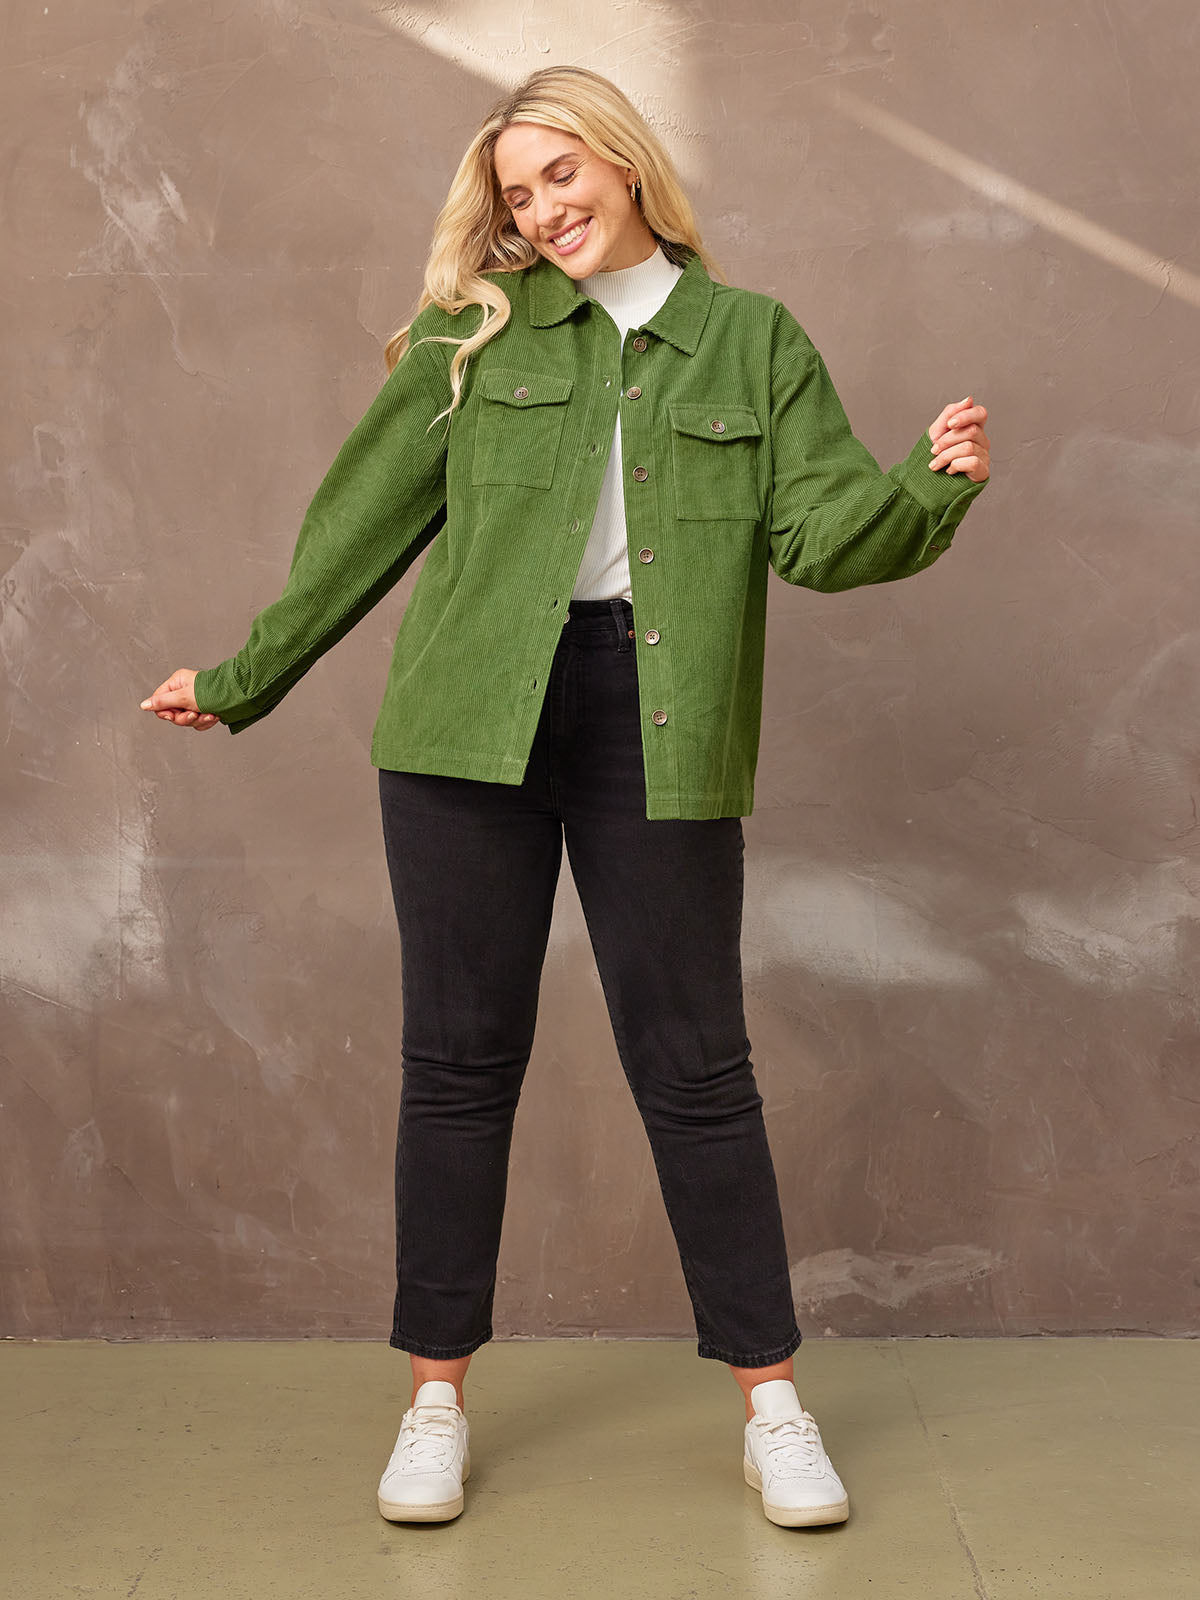 Smiling model in a cheerful pose with her arms out, in a sustainable olive coloured corduroy Yasmynn shacket paired with a white top and black trousers., looking at the ground.